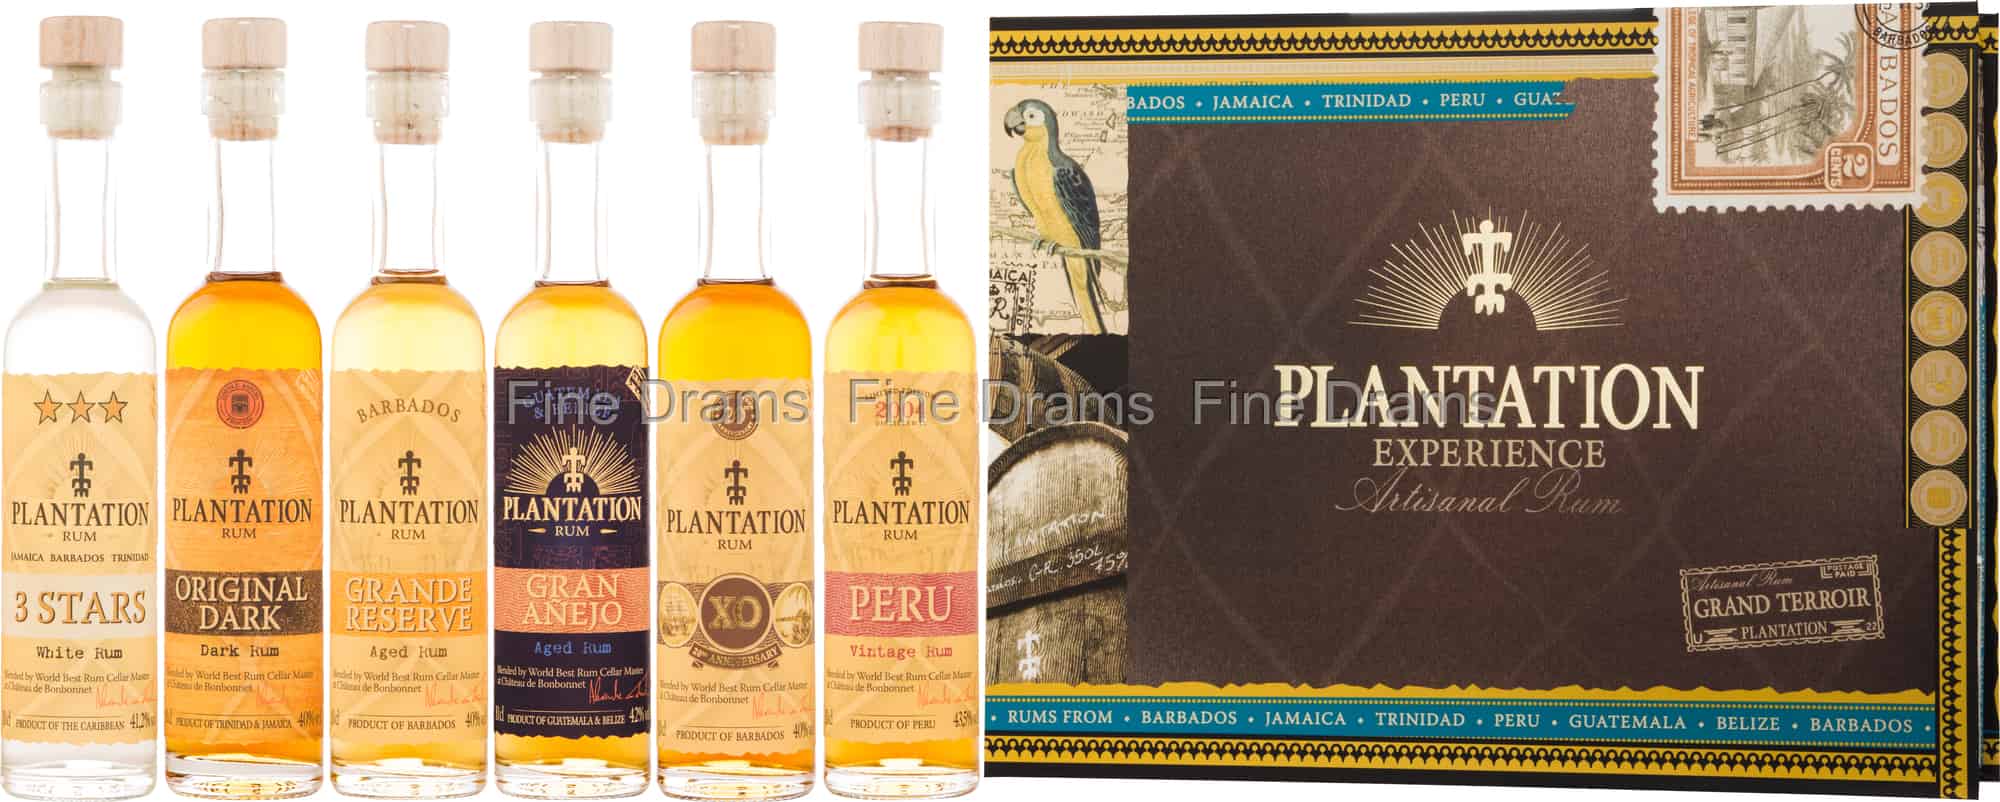 Plantation Rum Experience Gift Pack - 6 x 10 cl